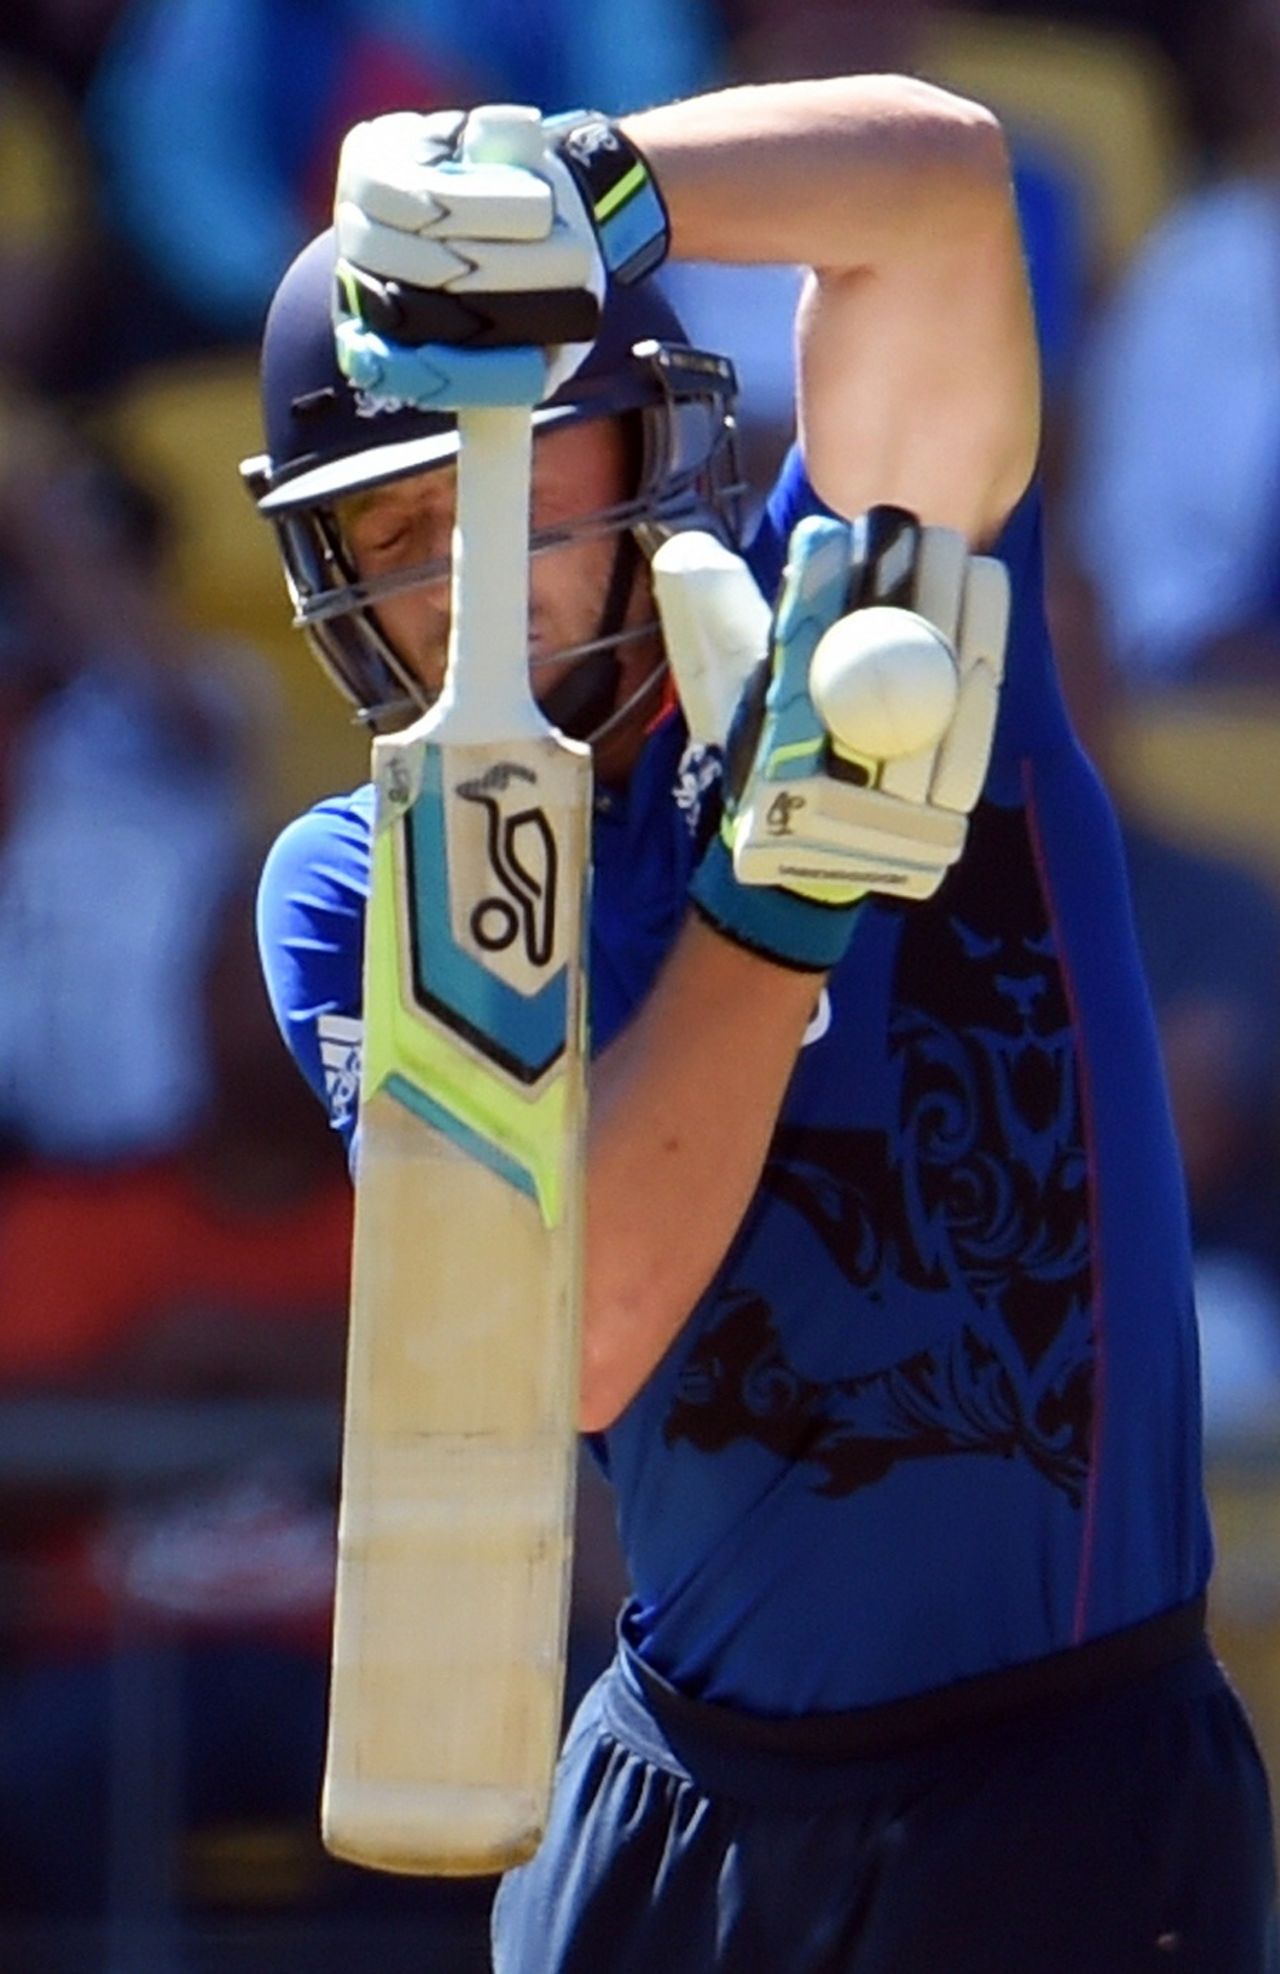 Jos Buttler failed to fend a lifter and was hit on the helmet, England v Sri Lanka, World Cup 2015, Group A, Wellington, March 1, 2015